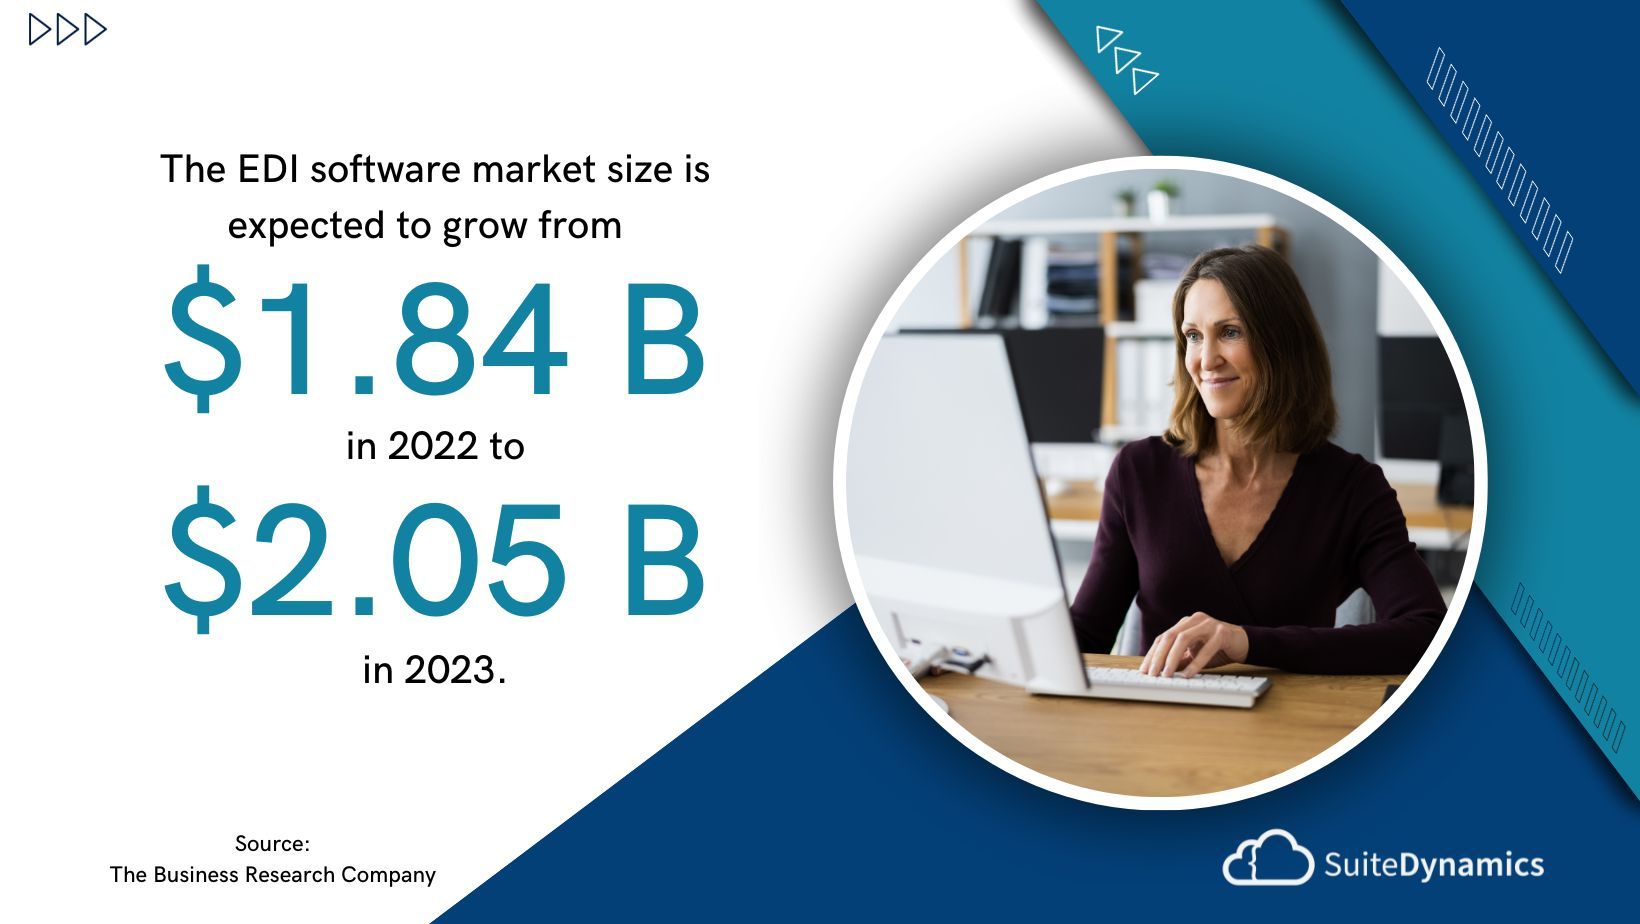 Graphic explaining that the EDI software markets size is expected to grow from $1.84 billion in 2022 to $2.05 billion in 2023.